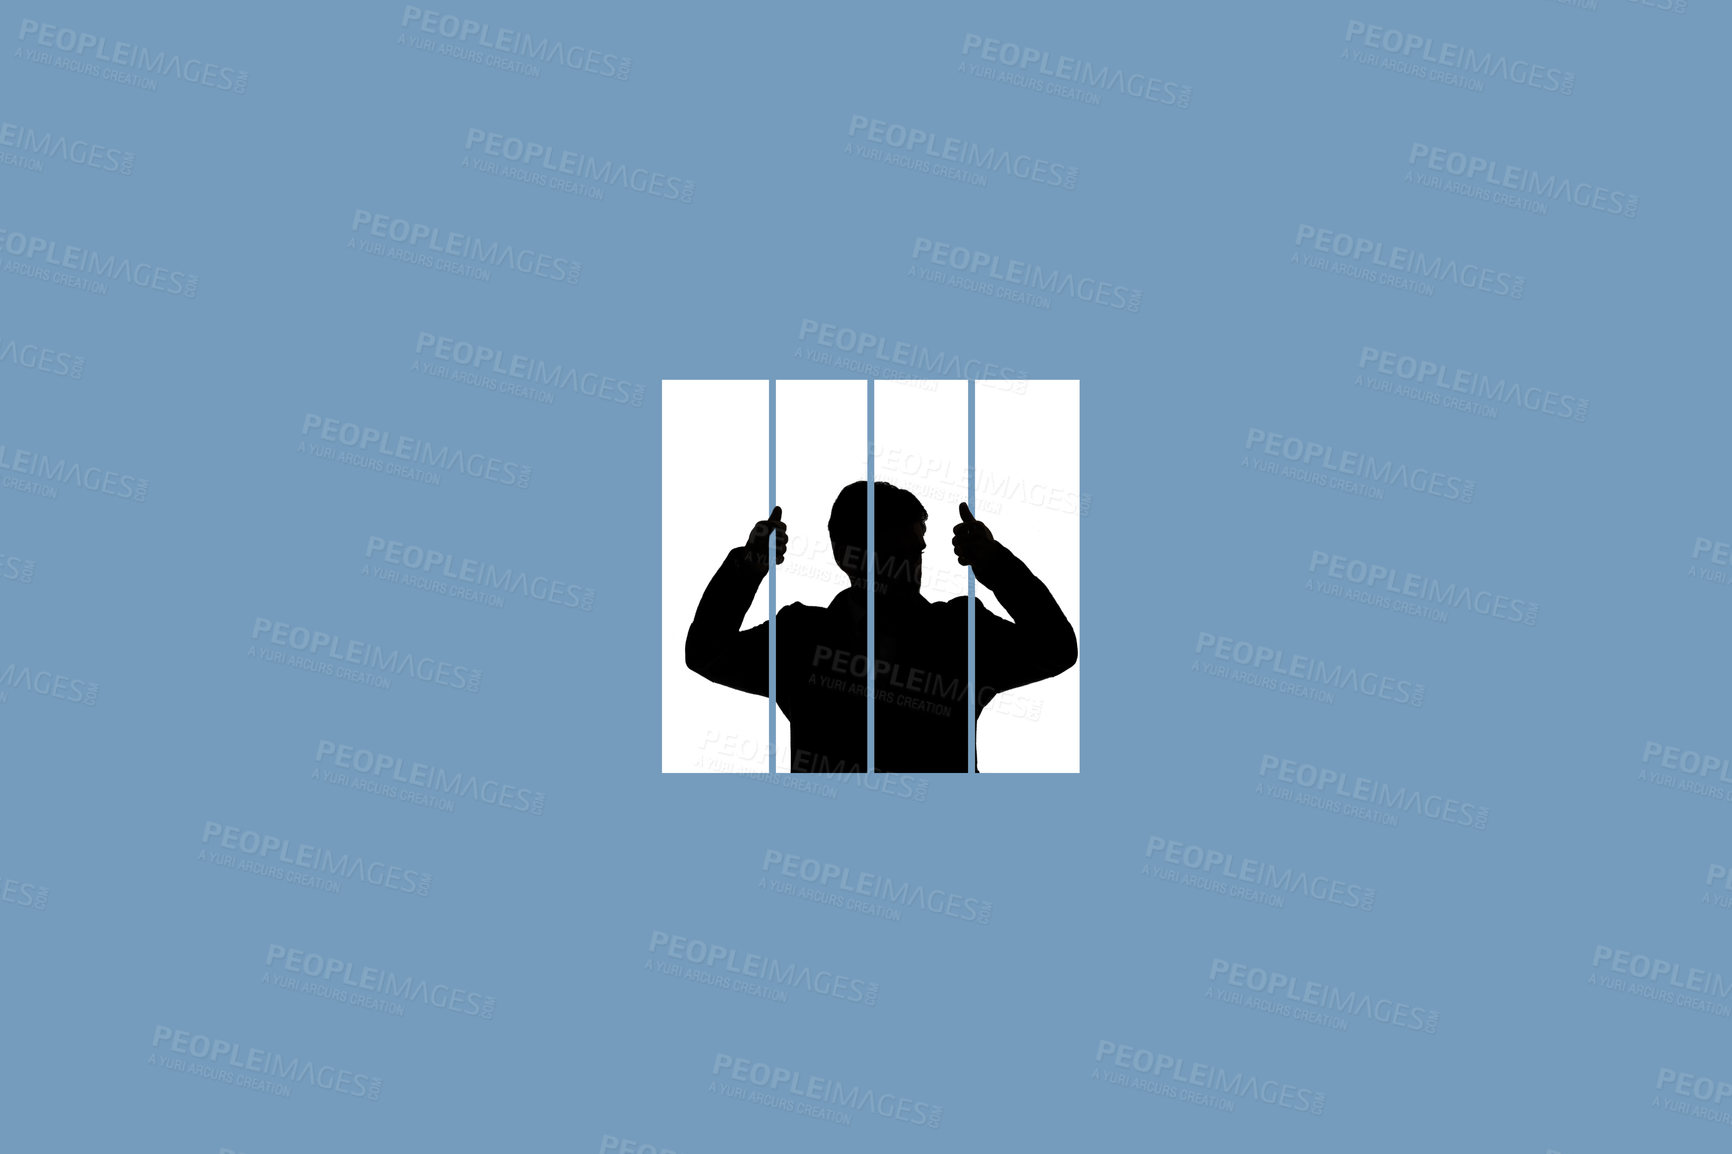 Buy stock photo Shot of a businessman in silhouette behind bars against a blue background